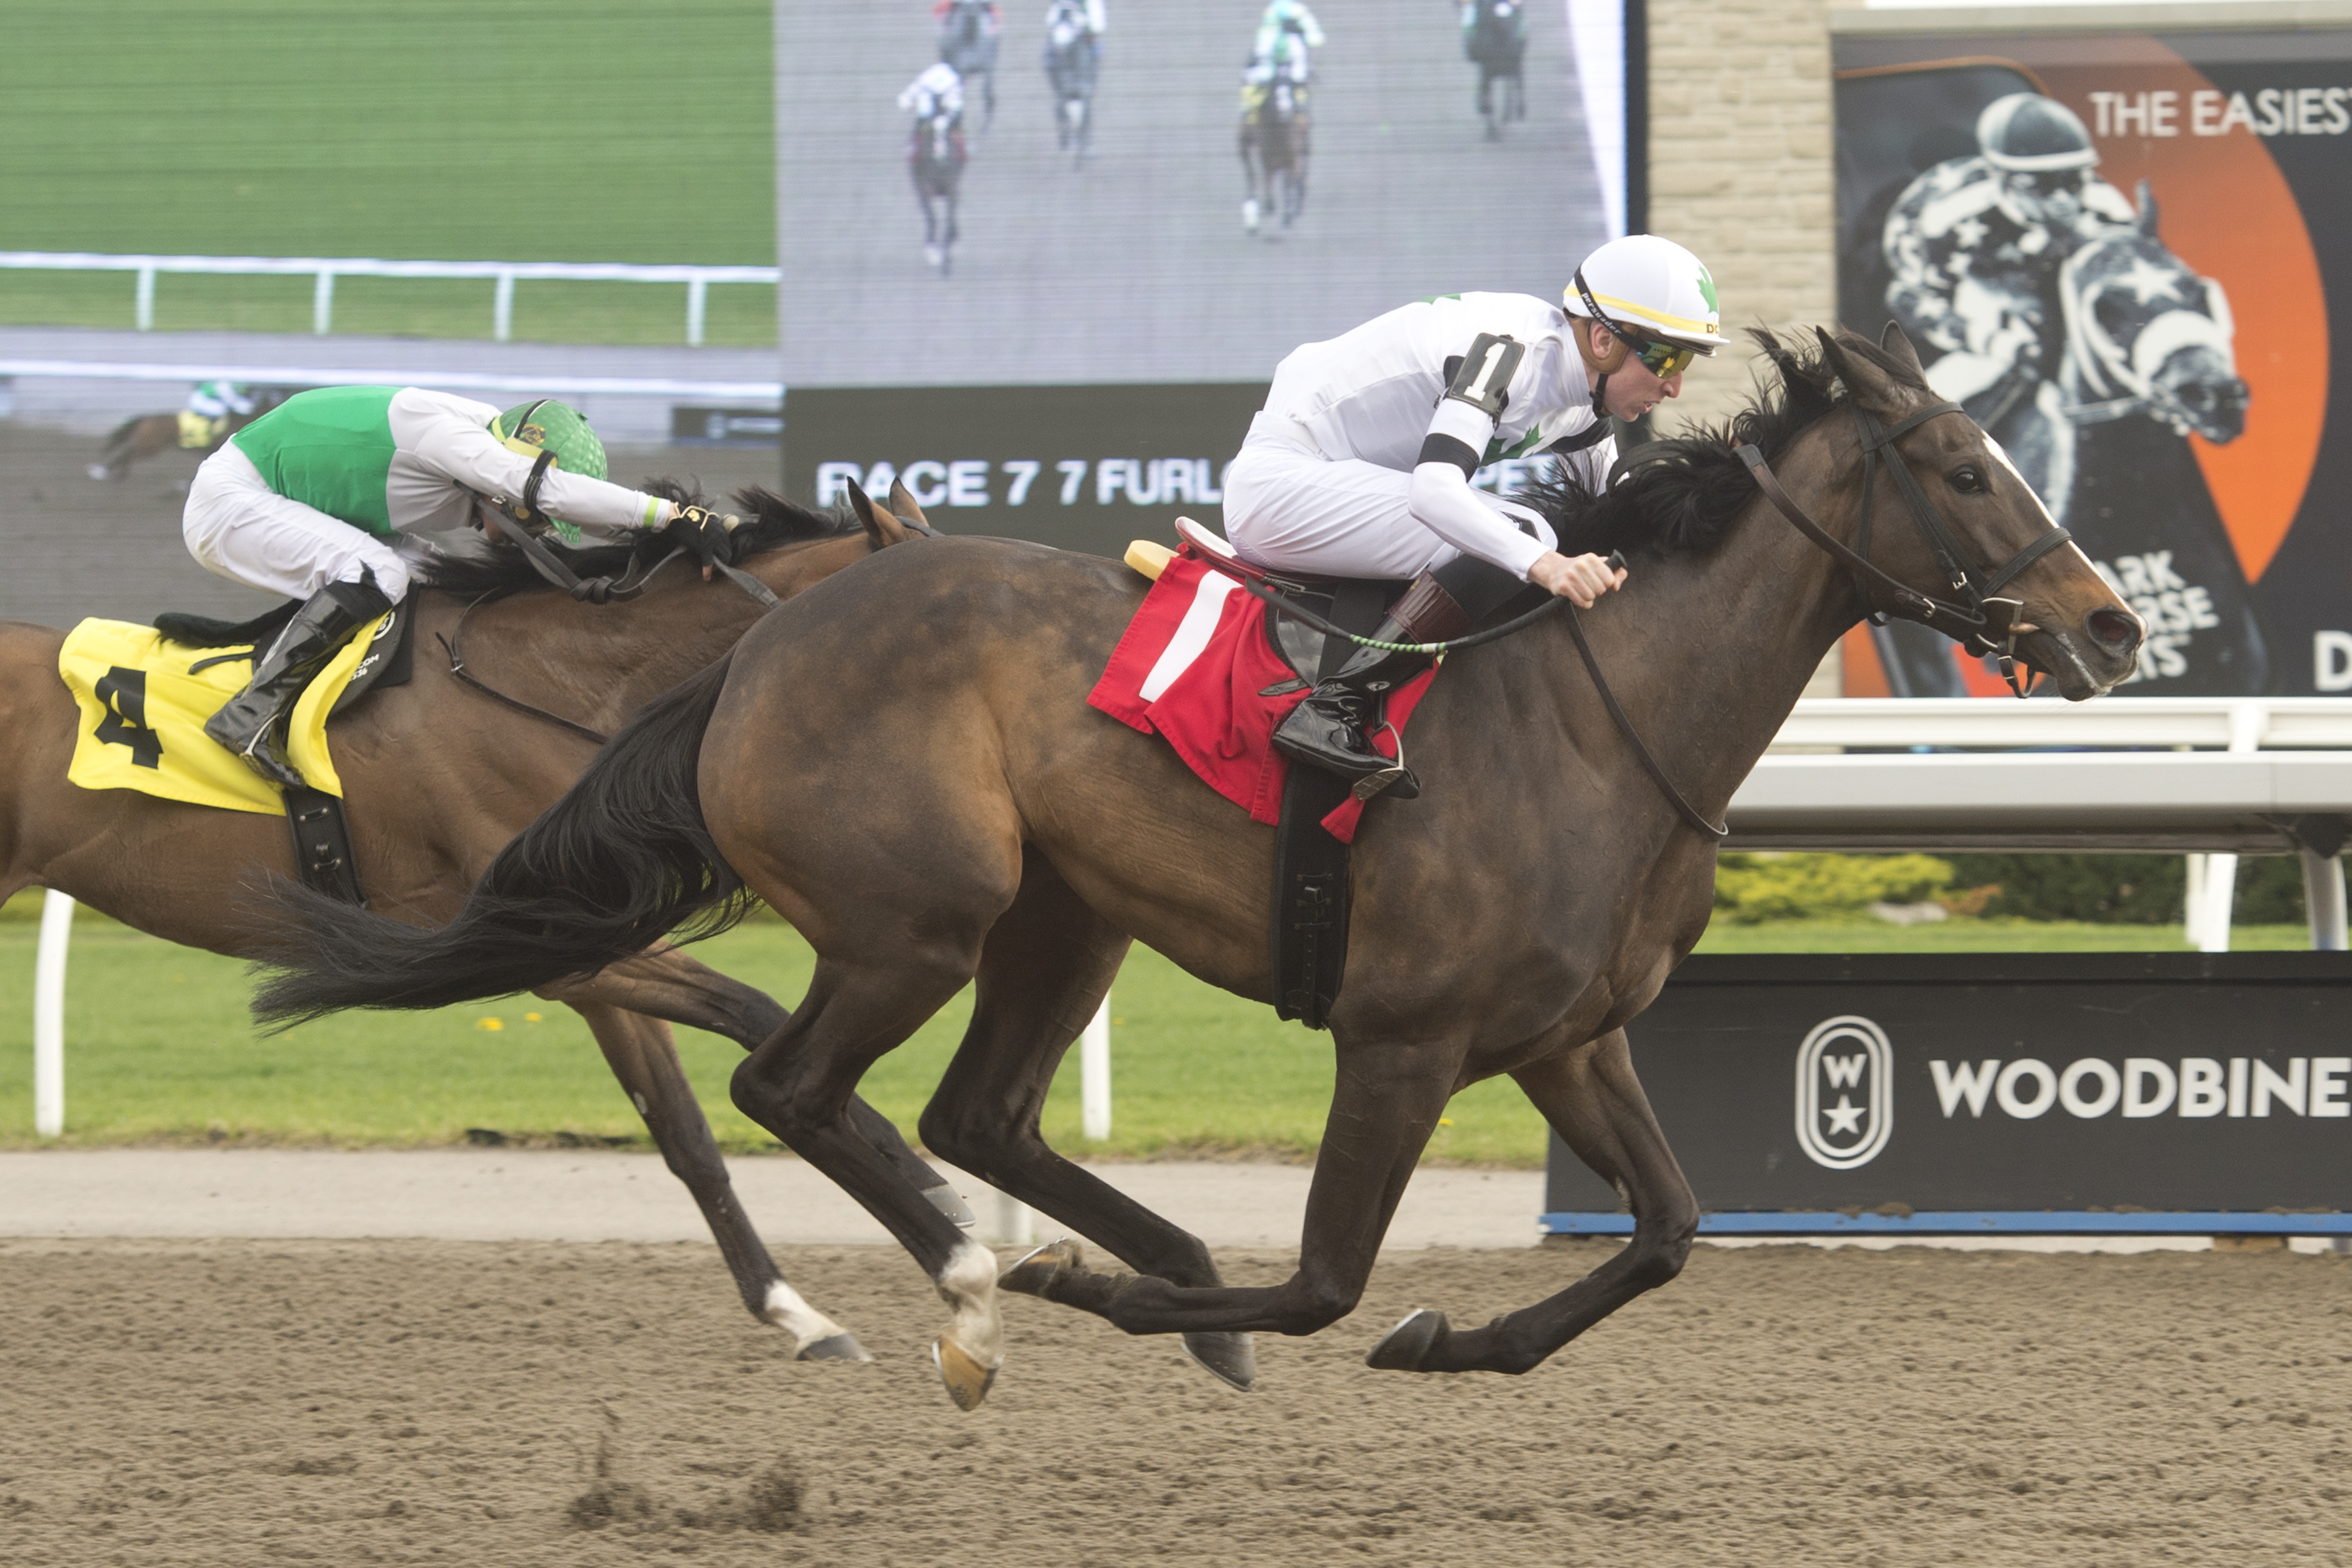 Ultra-consistent Millie Girl Takes on 11 in G3 Ontario Matron